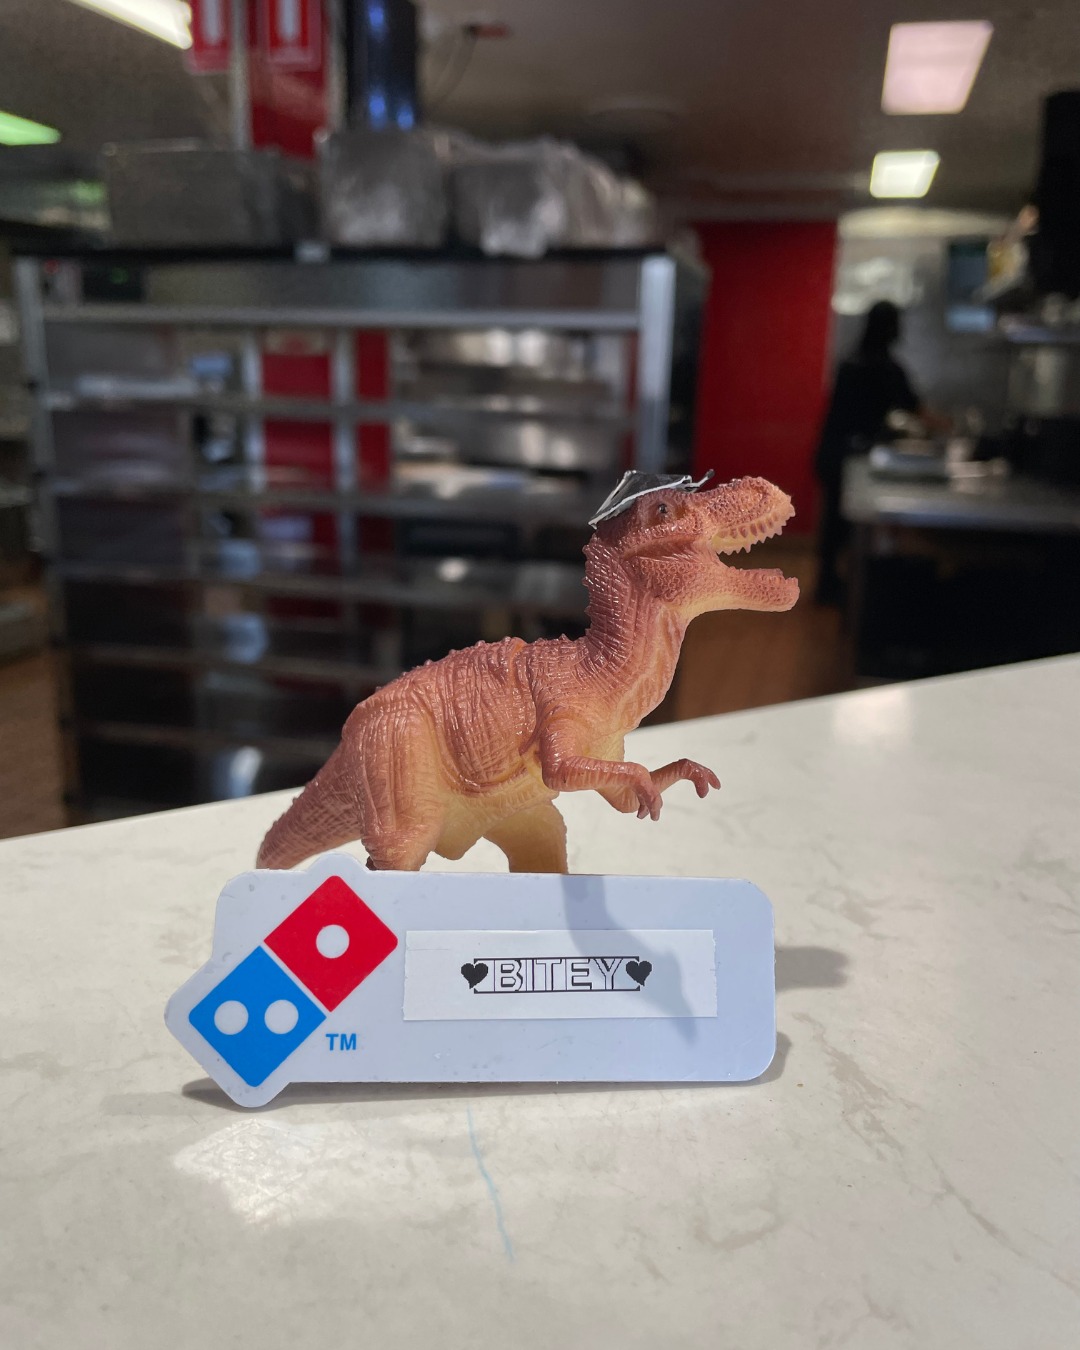 Bitey the toy dinosaur placed on a counter. A Domino's name tag with "Bitey" and two hearts is leaning against him.